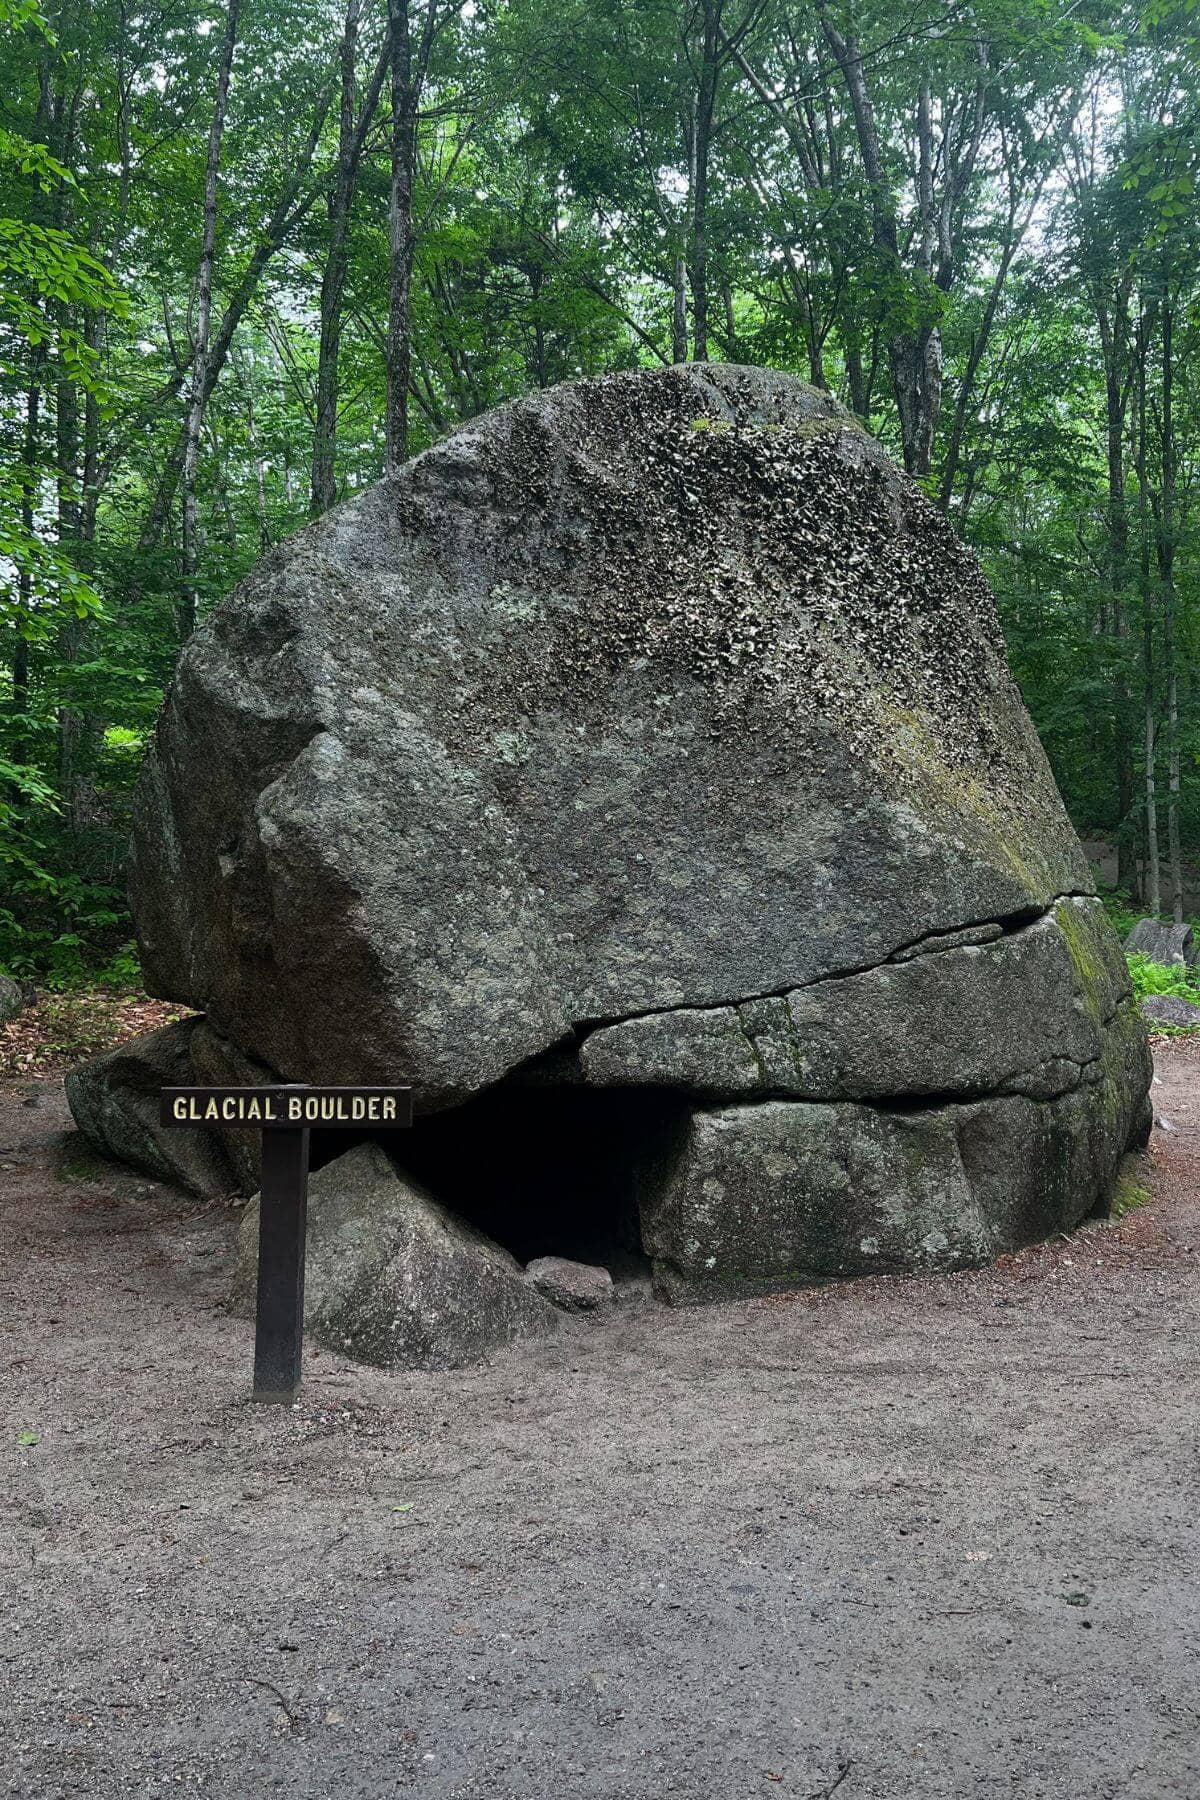 A large rock sits in the middle of a wooded area.